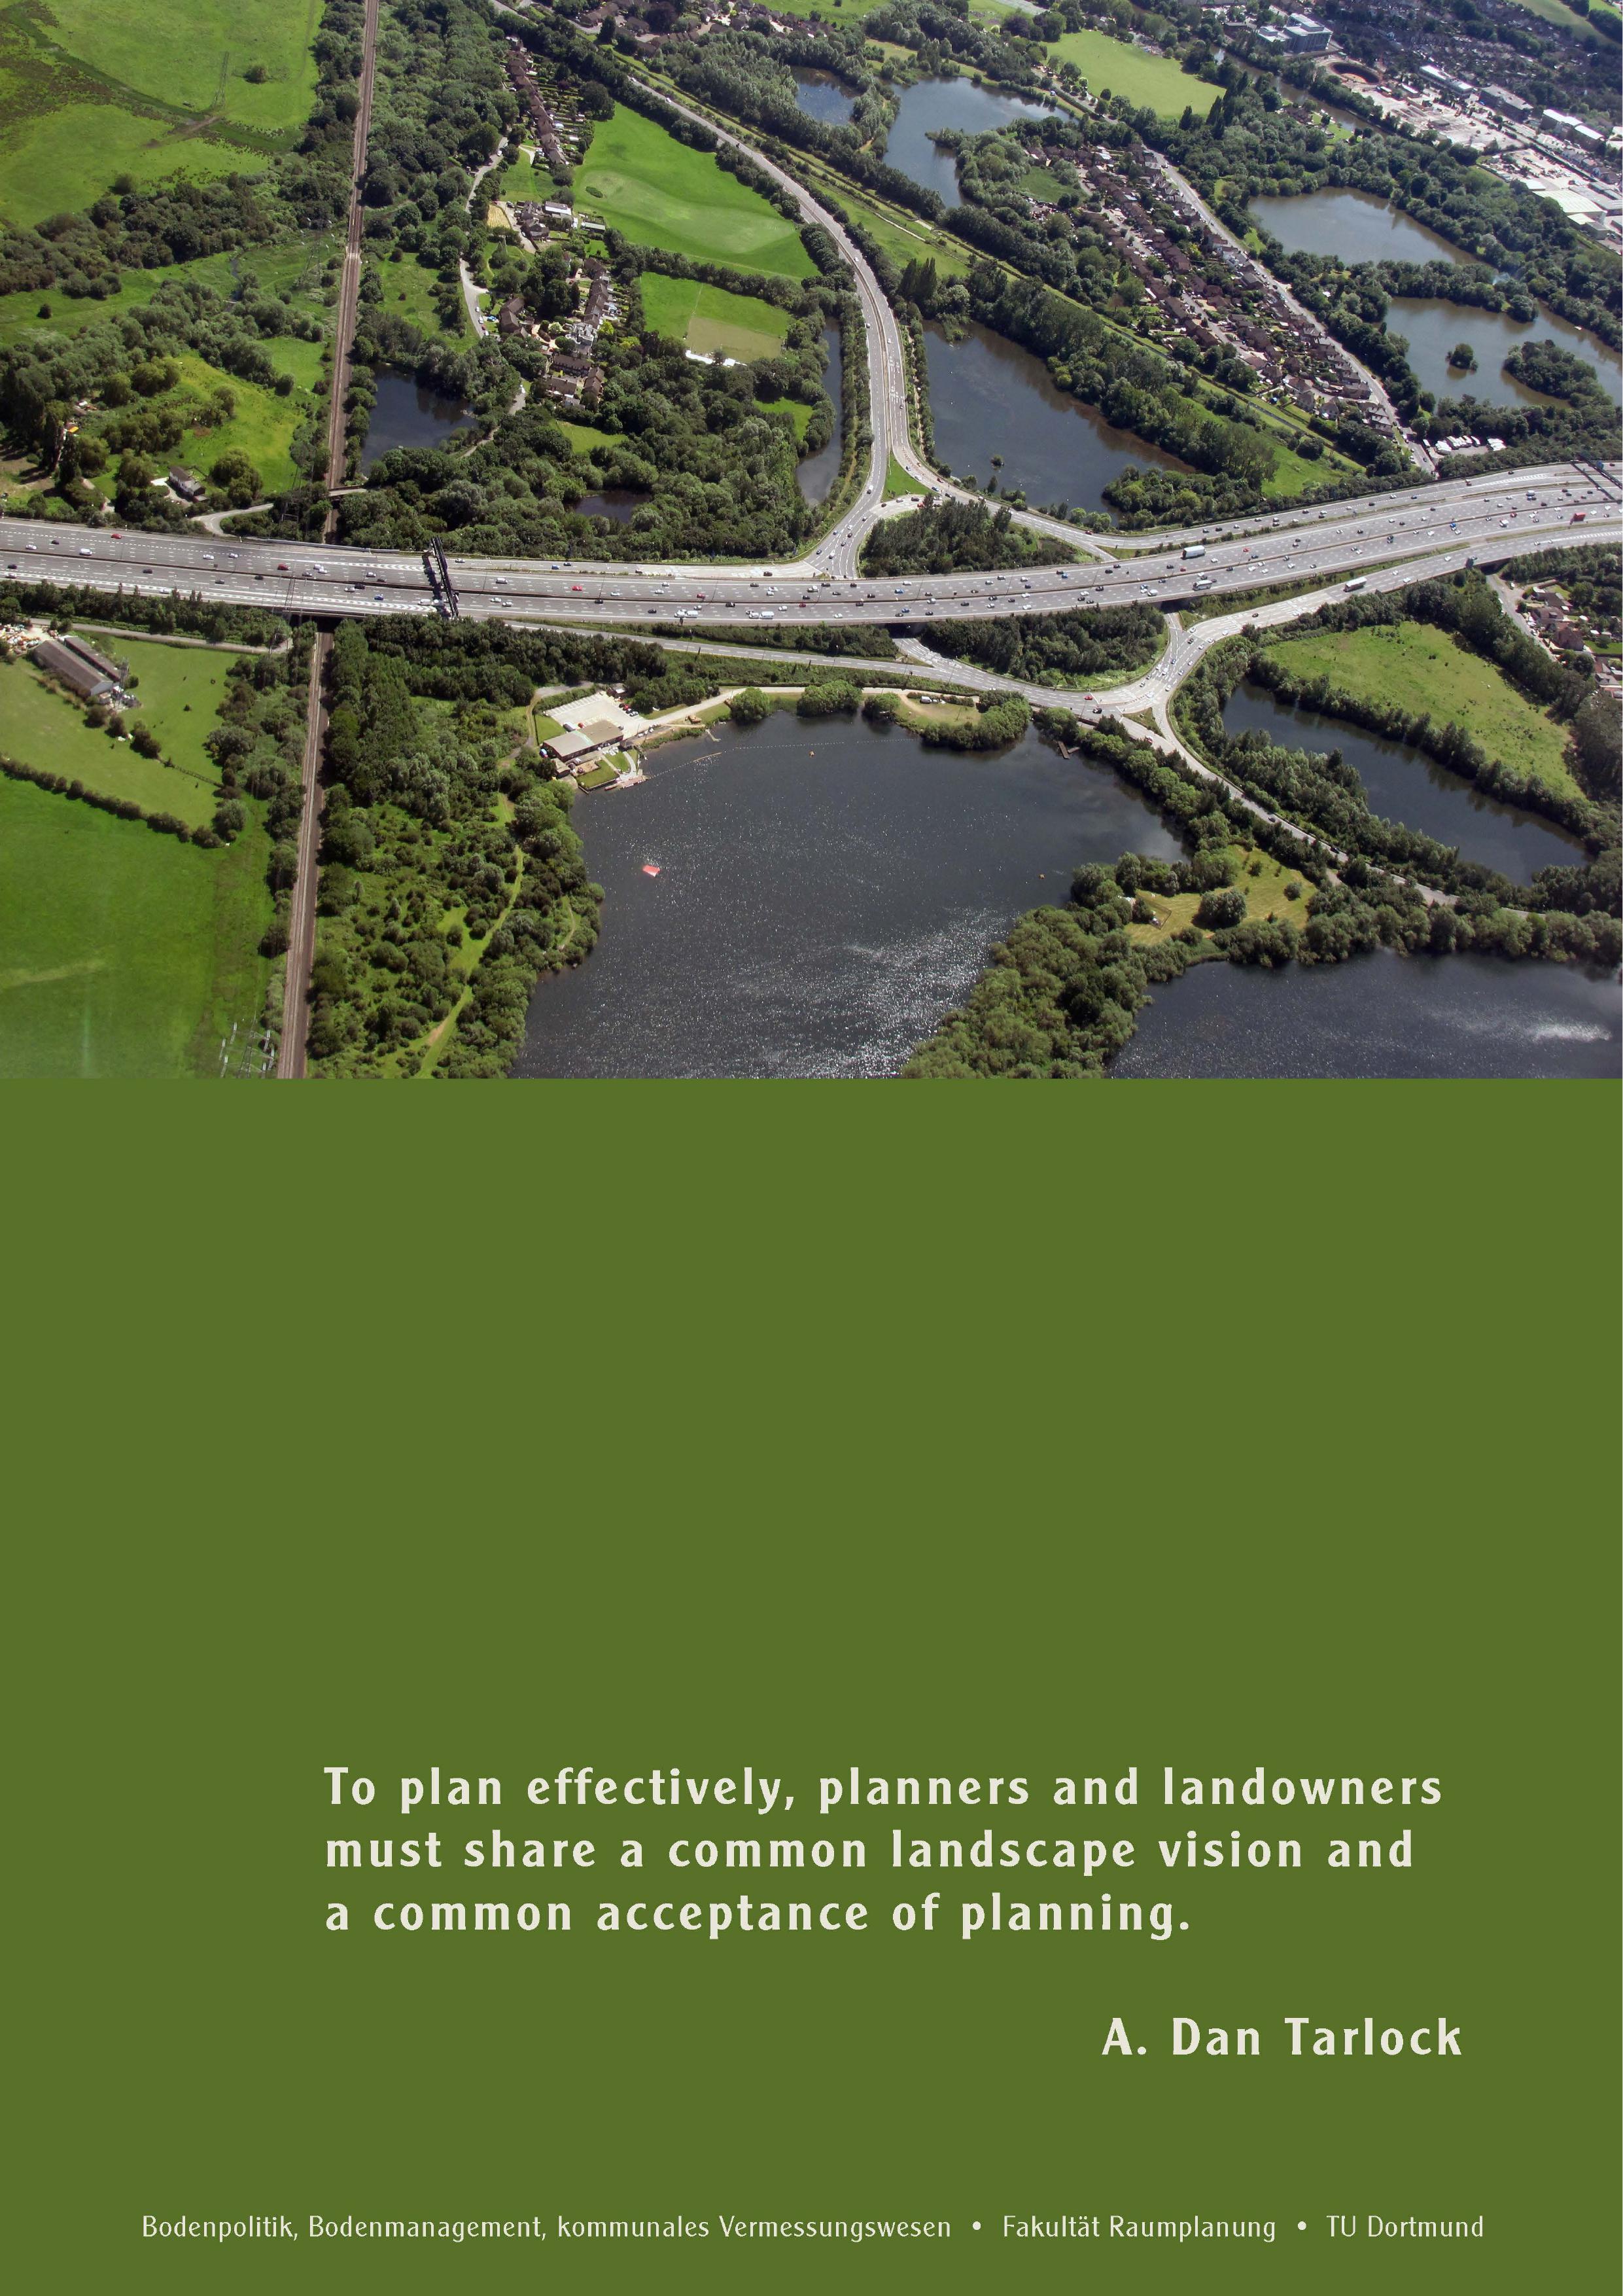 Environmental compliance in land use planning in Germany